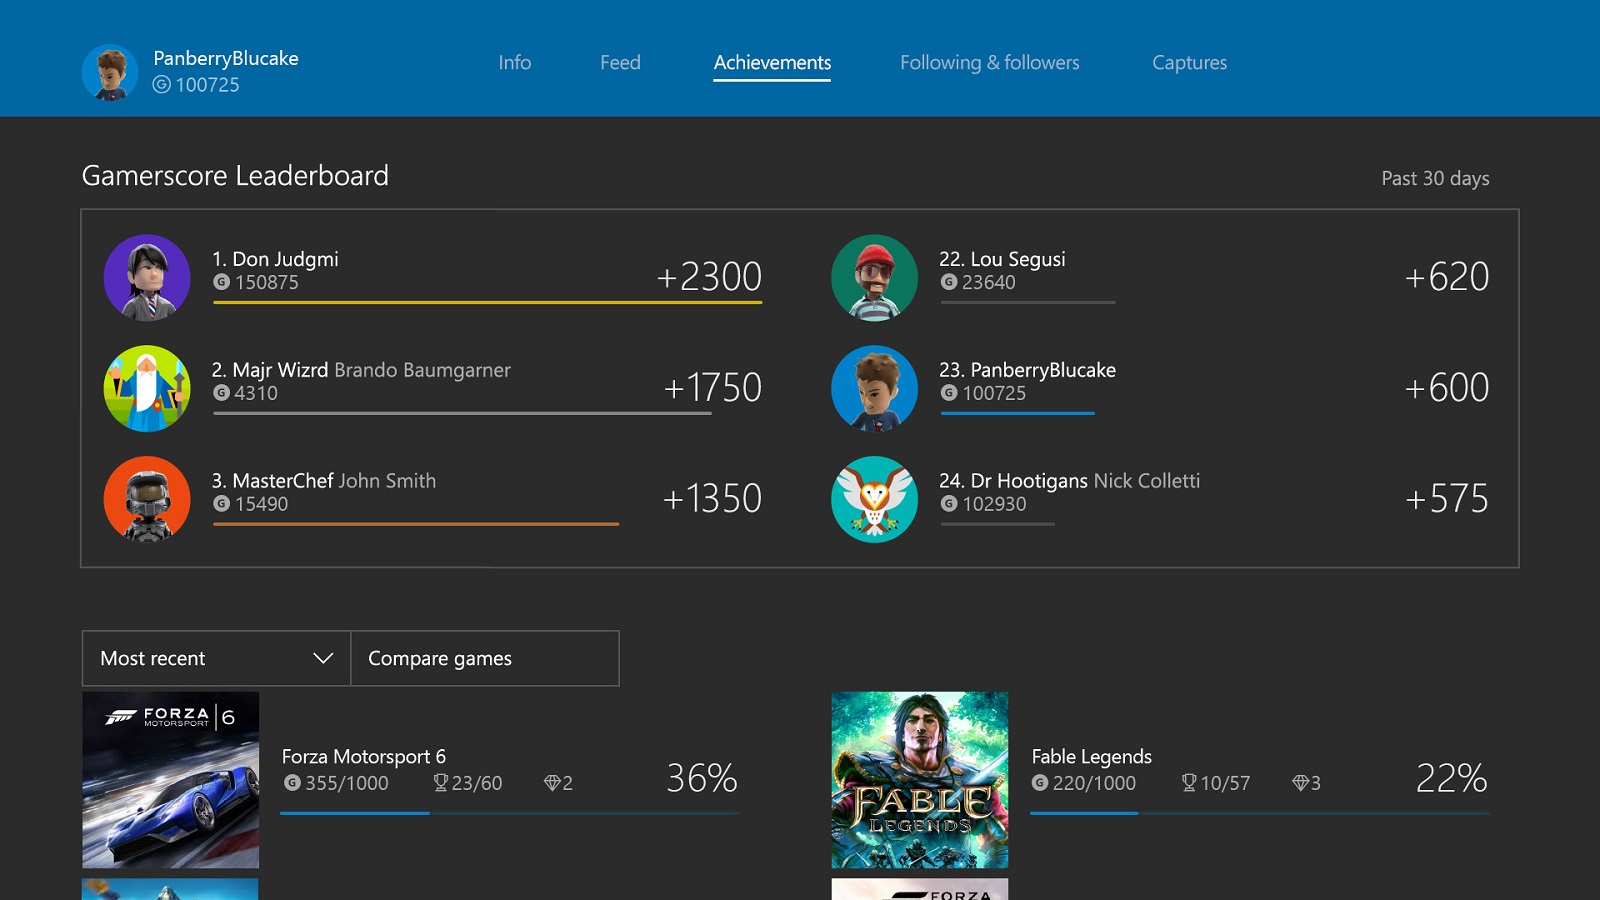 Gamerscore Leaderboard - Mise a Jour Xbox One - Fevrier 2016